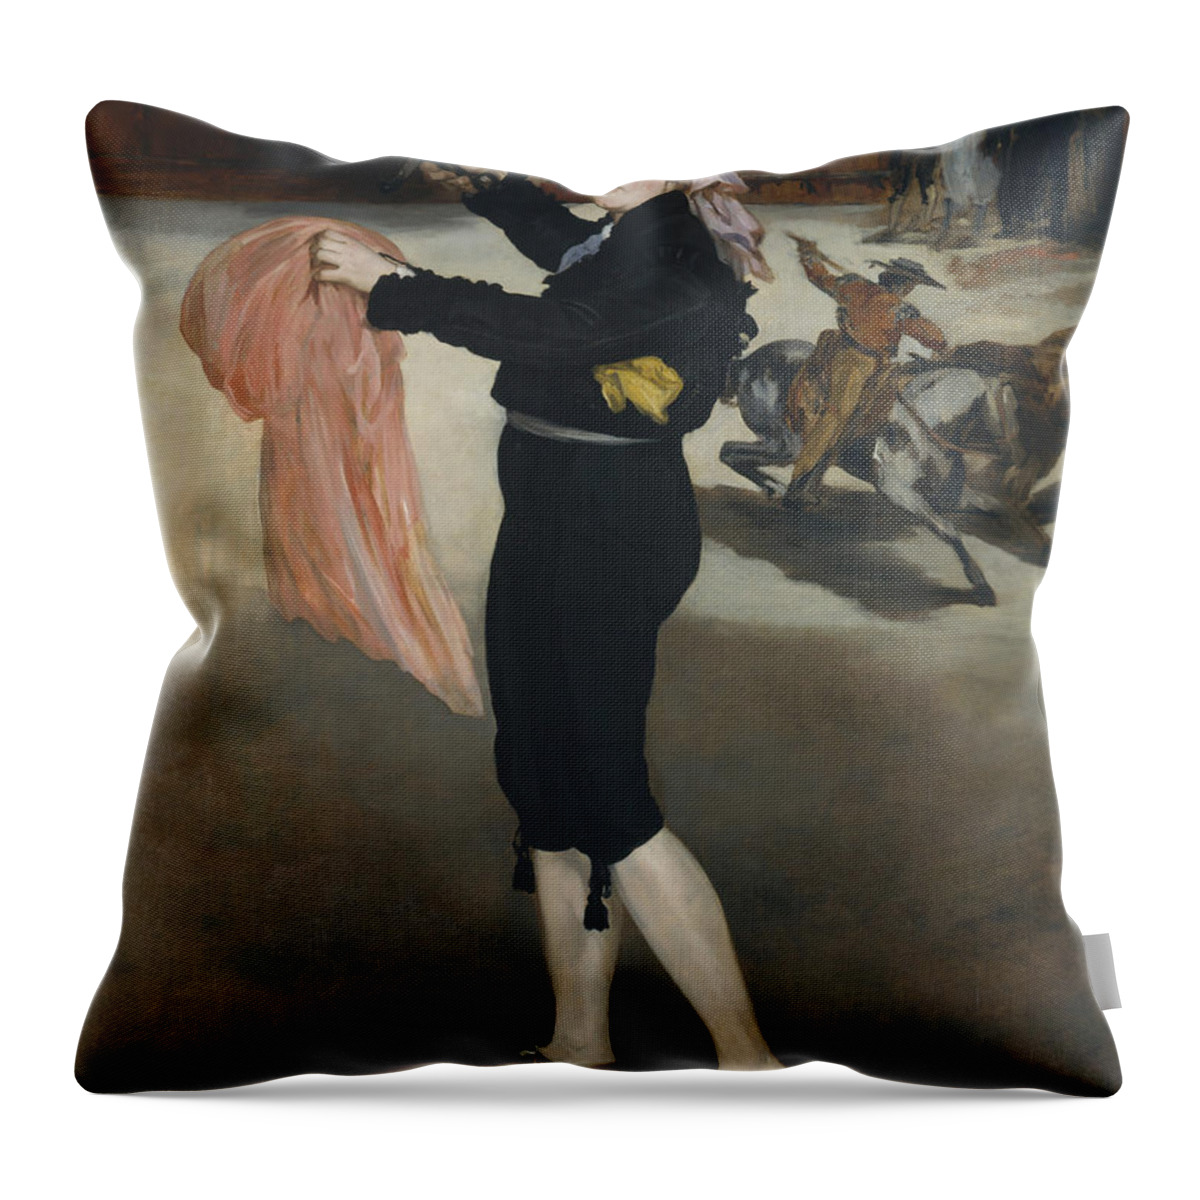 19th Century Throw Pillow featuring the painting Mademoiselle V. . . In The Costume Of An Espada, 1862 by Edouard Manet